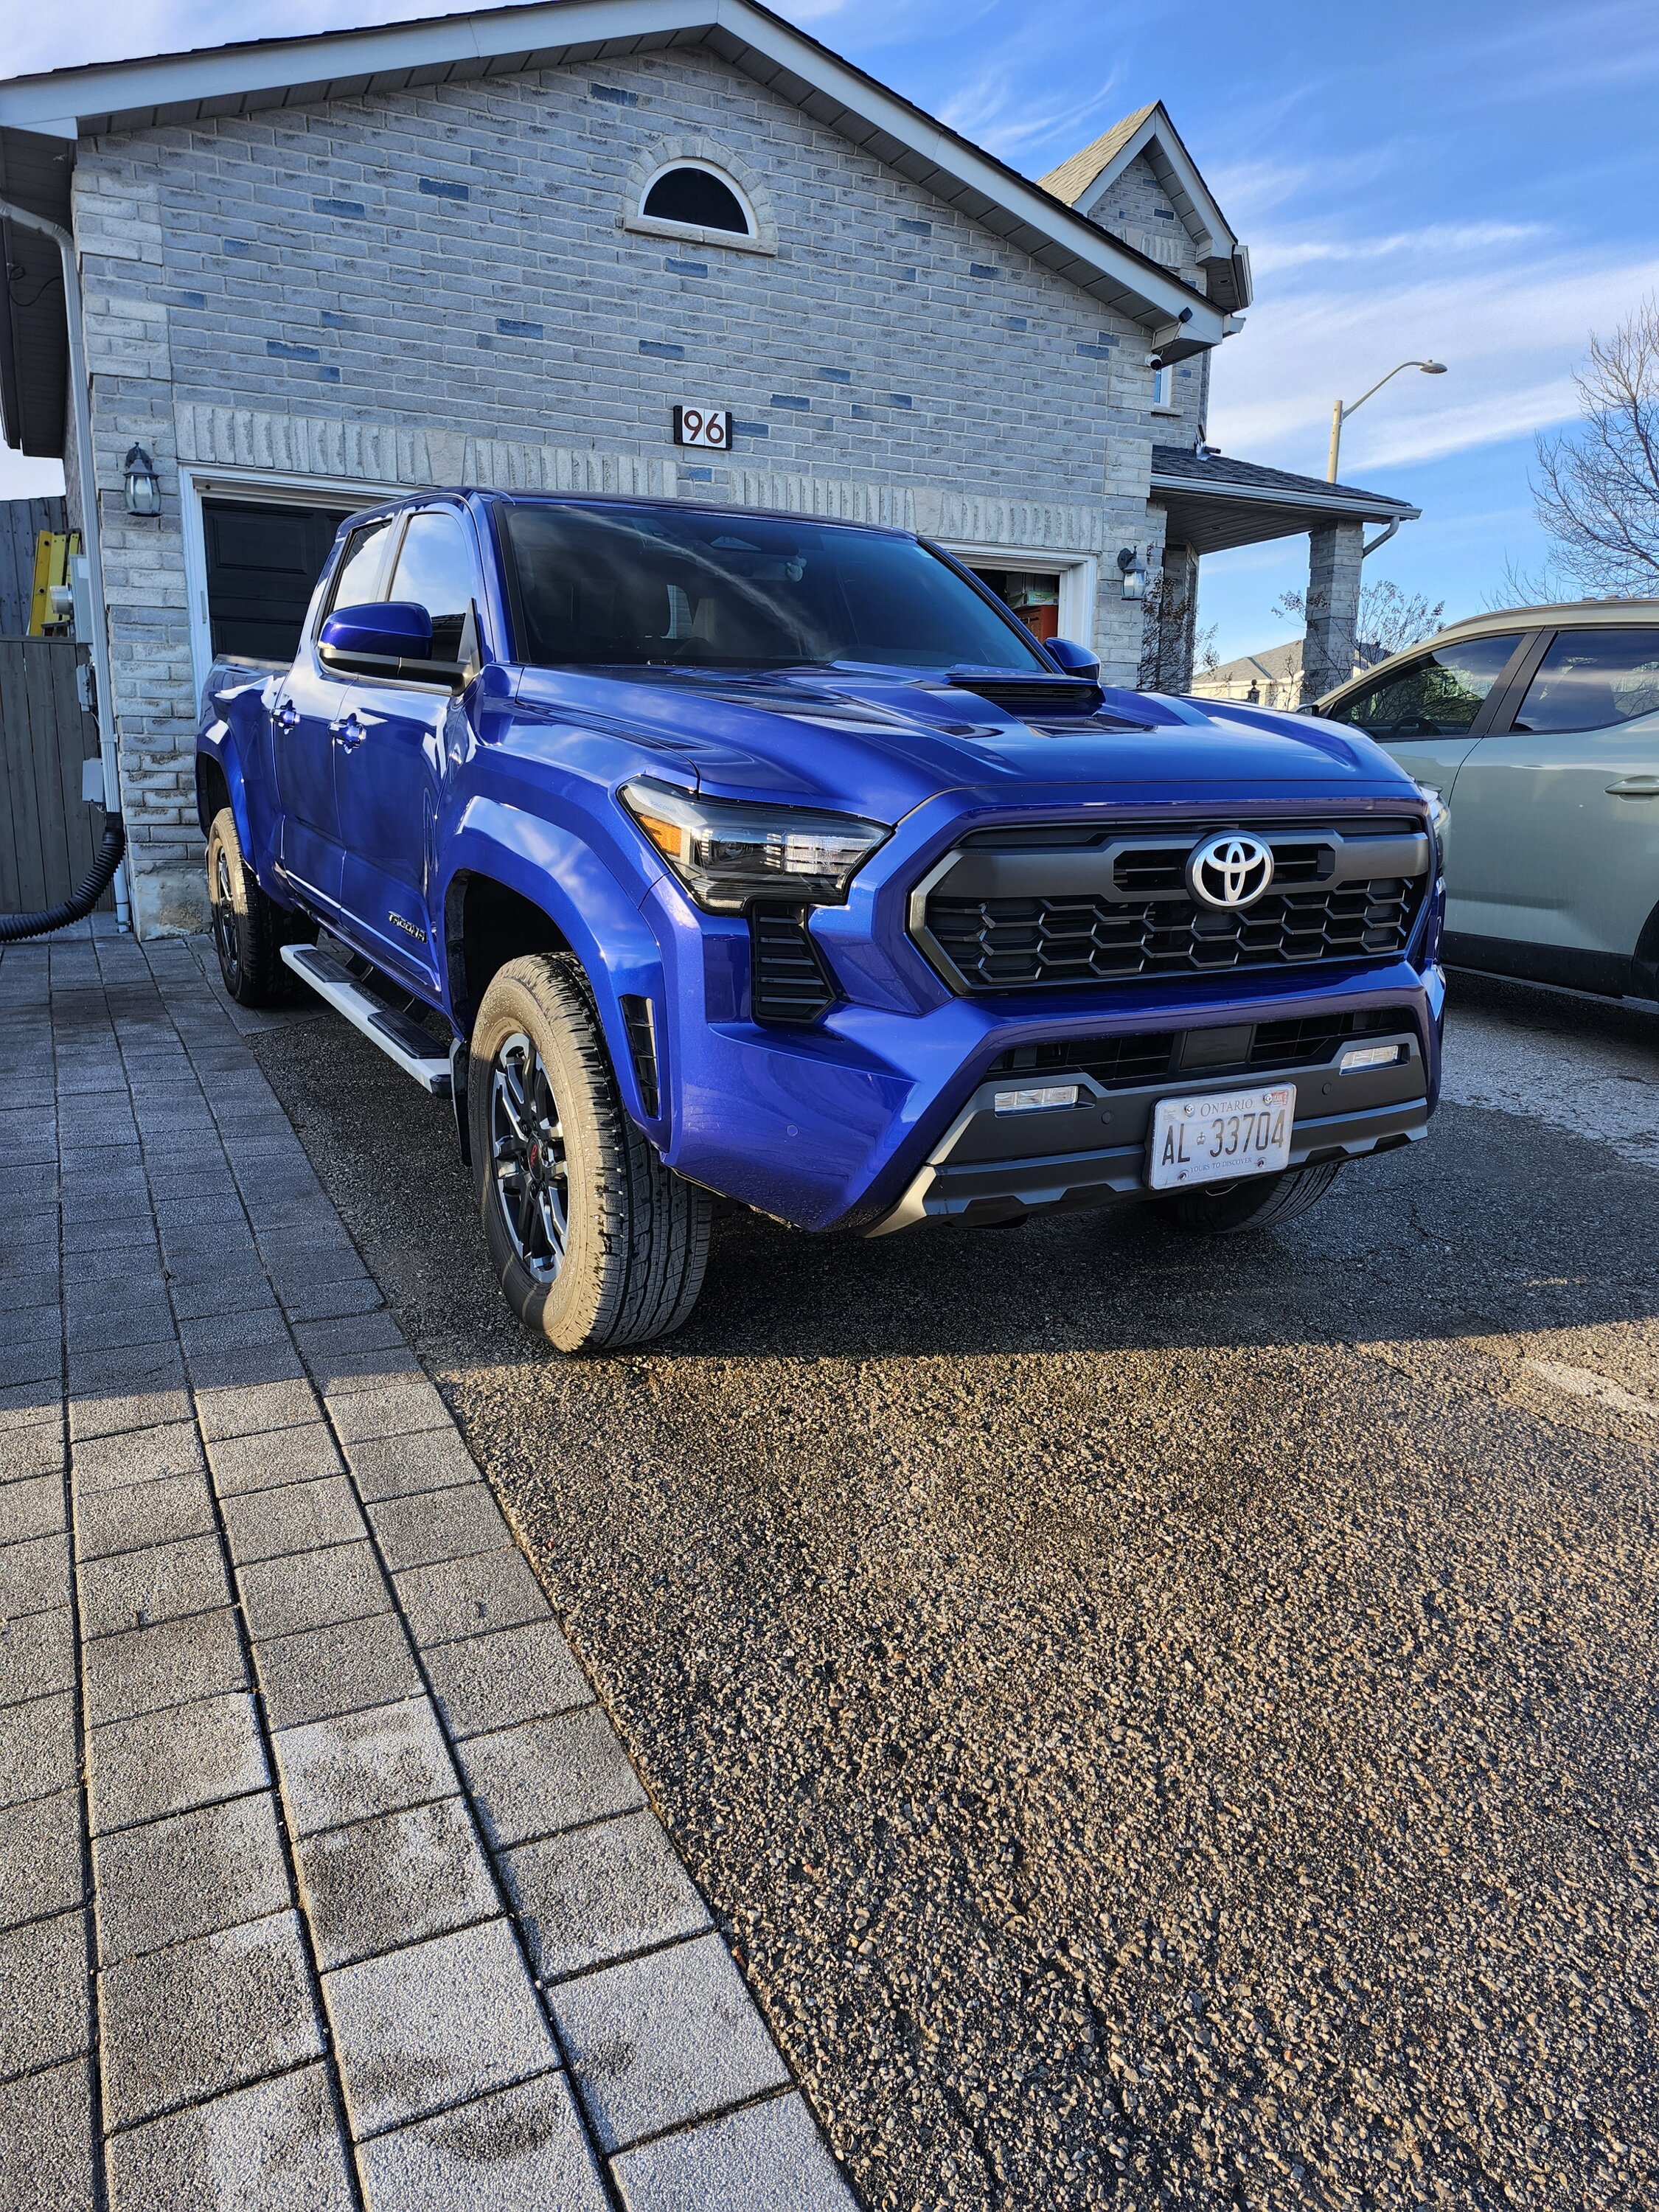 2024 Tacoma 1st month of 2024 Tacoma ownership: flawless with no issues 20240307_172432